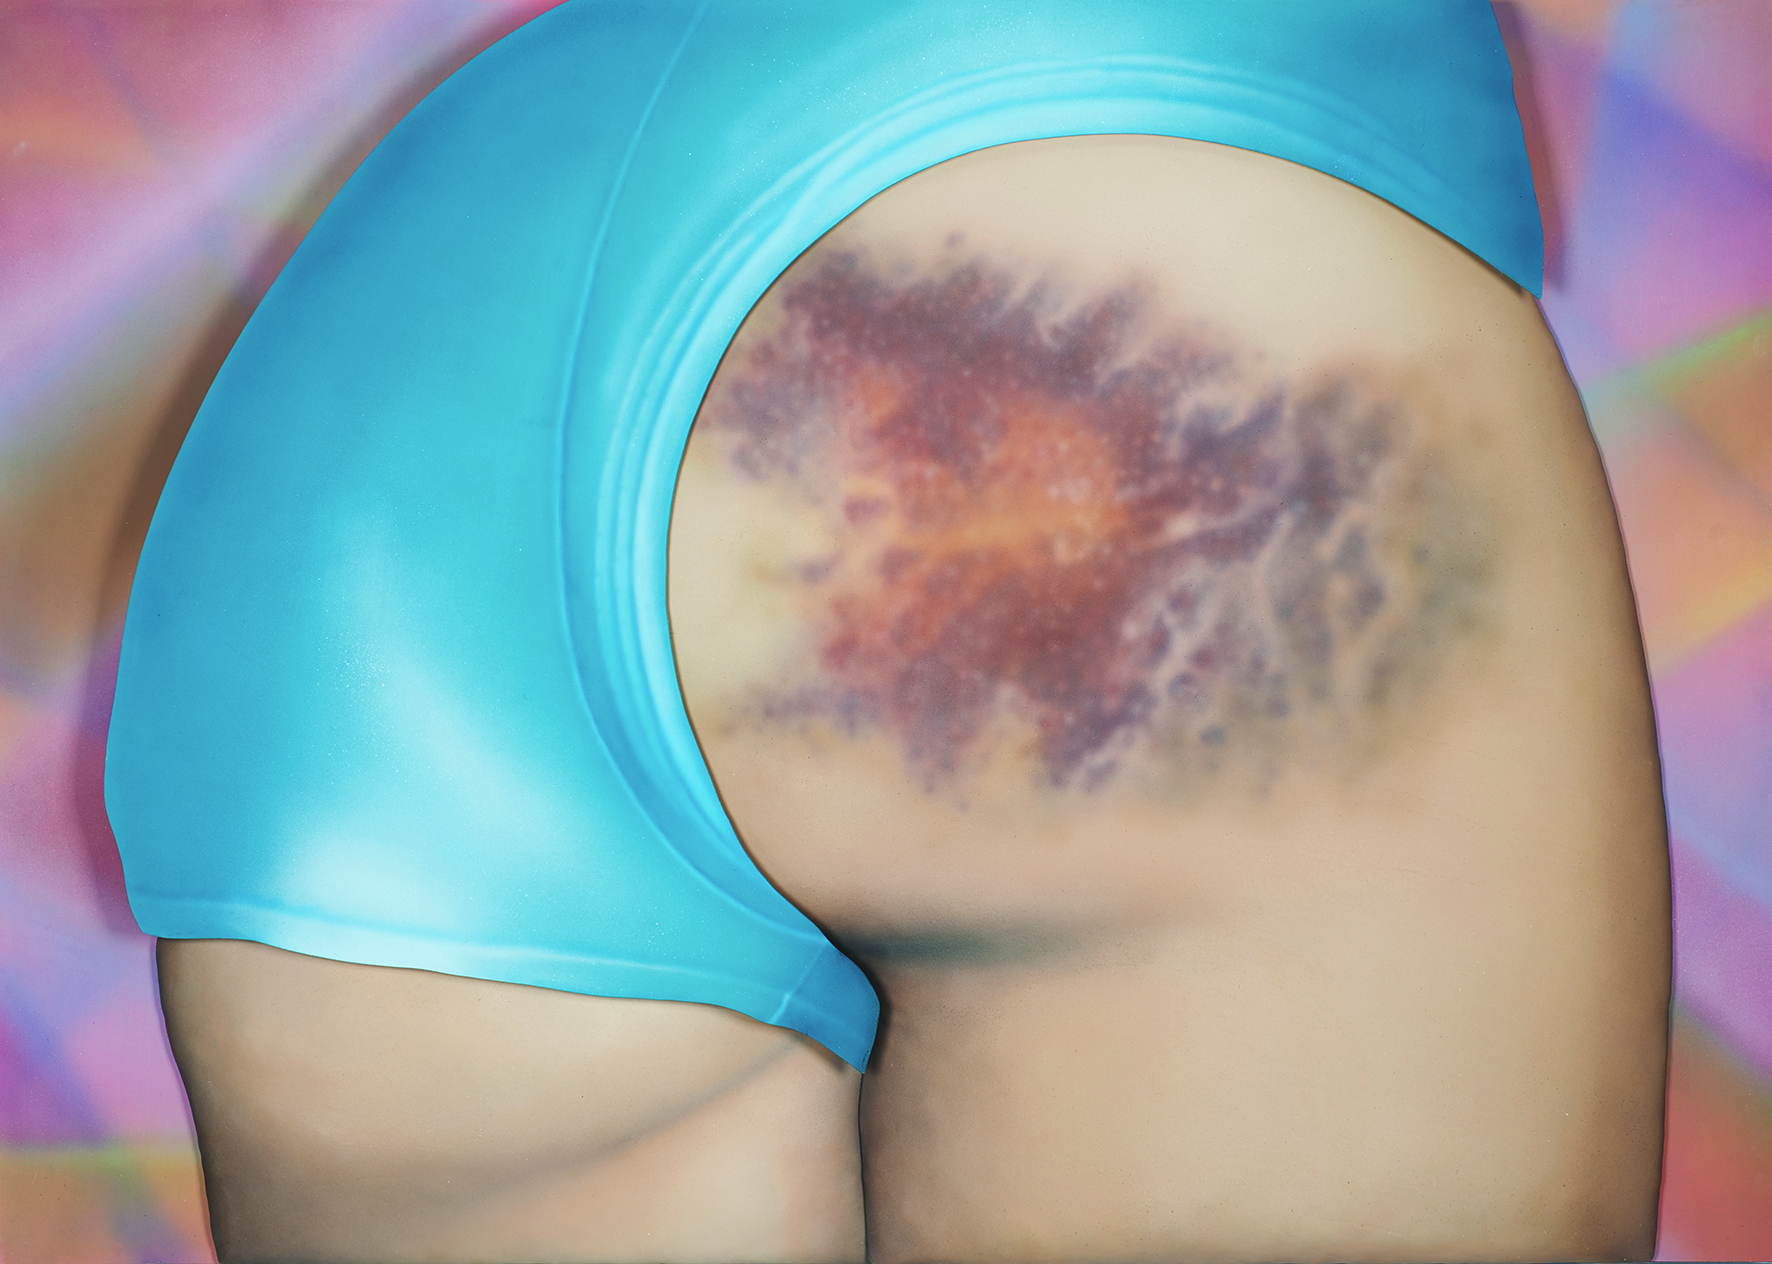 I Got a Really Beautiful Bruise on My Bum, Do You Want To See a Pic? It Has 12 Colours And Is the Size of My Head! - Riikka Hyvönen - Atomlabor Blog